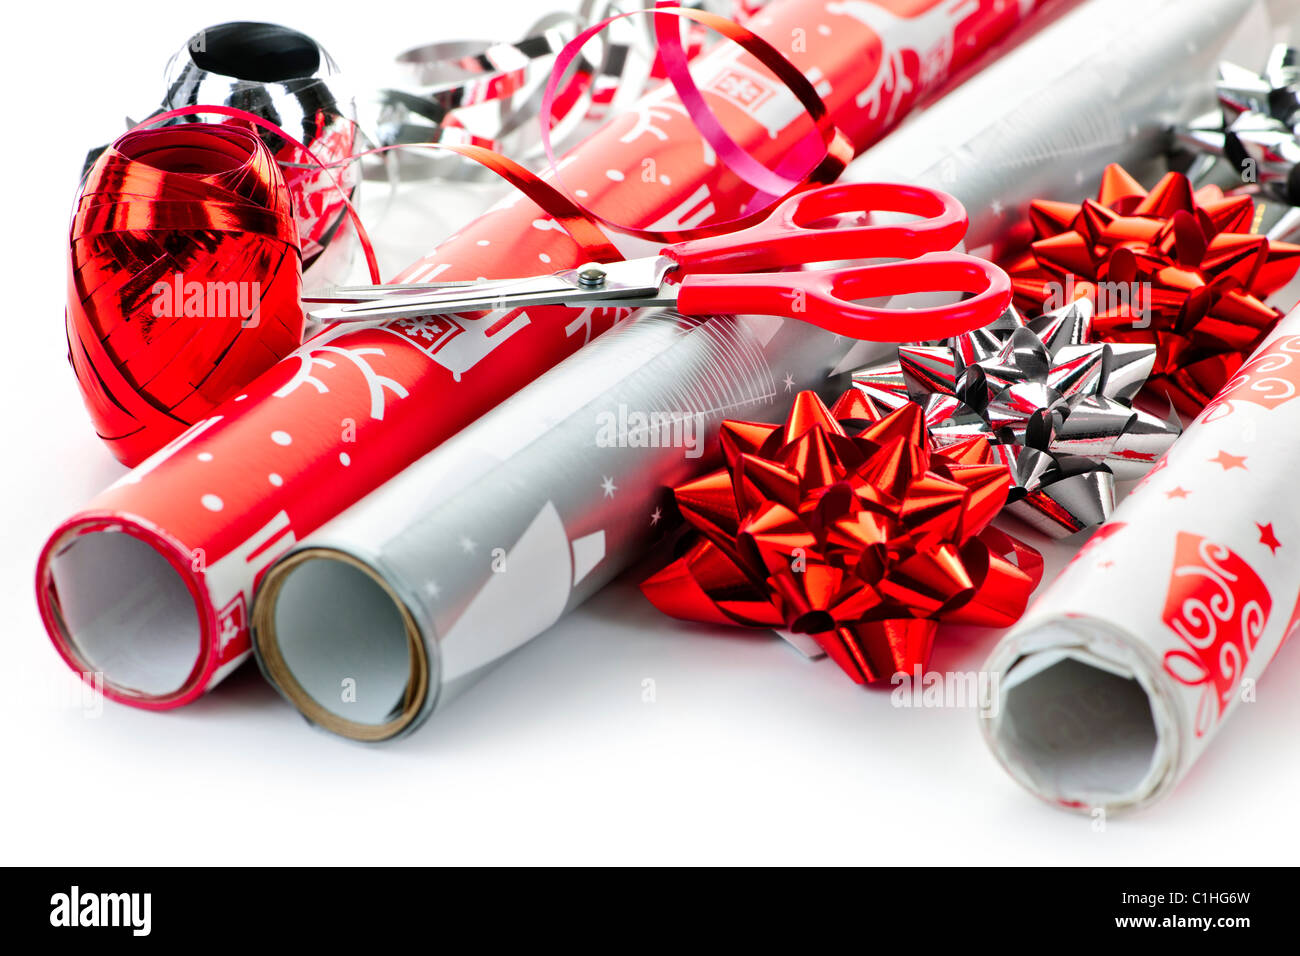 Getting organized: Paper wrap with Christmas theme, scotch tape, scissors  and ribbons for present wrapping, viewed from above Stock Photo - Alamy